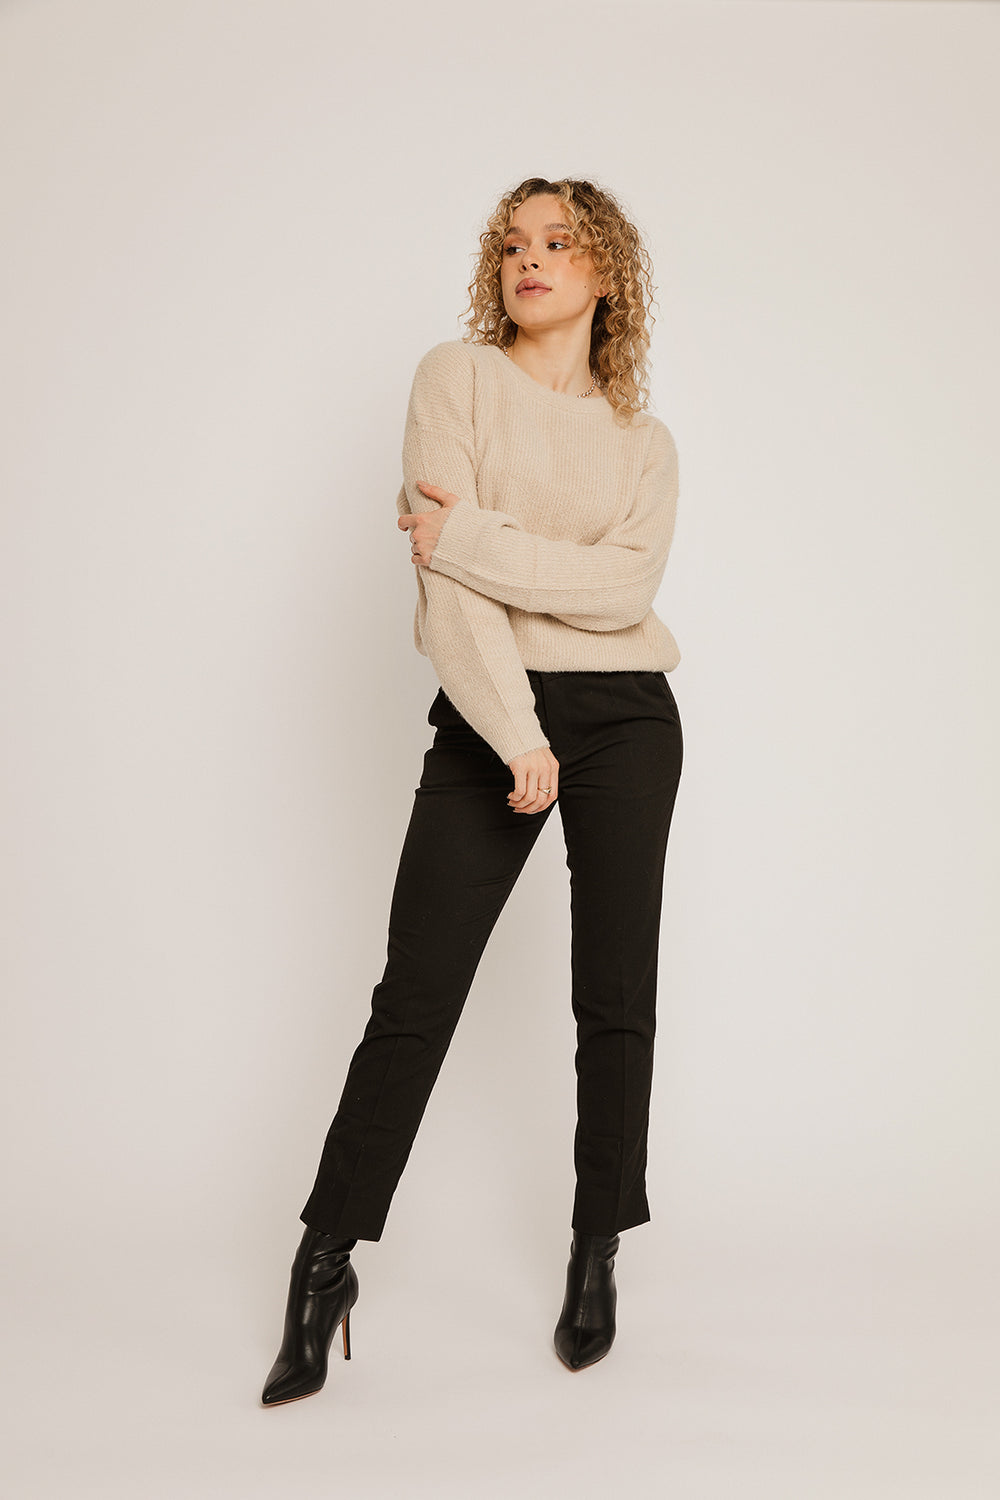 Evelyna Black Cigarette Trousers - Sugar + Style